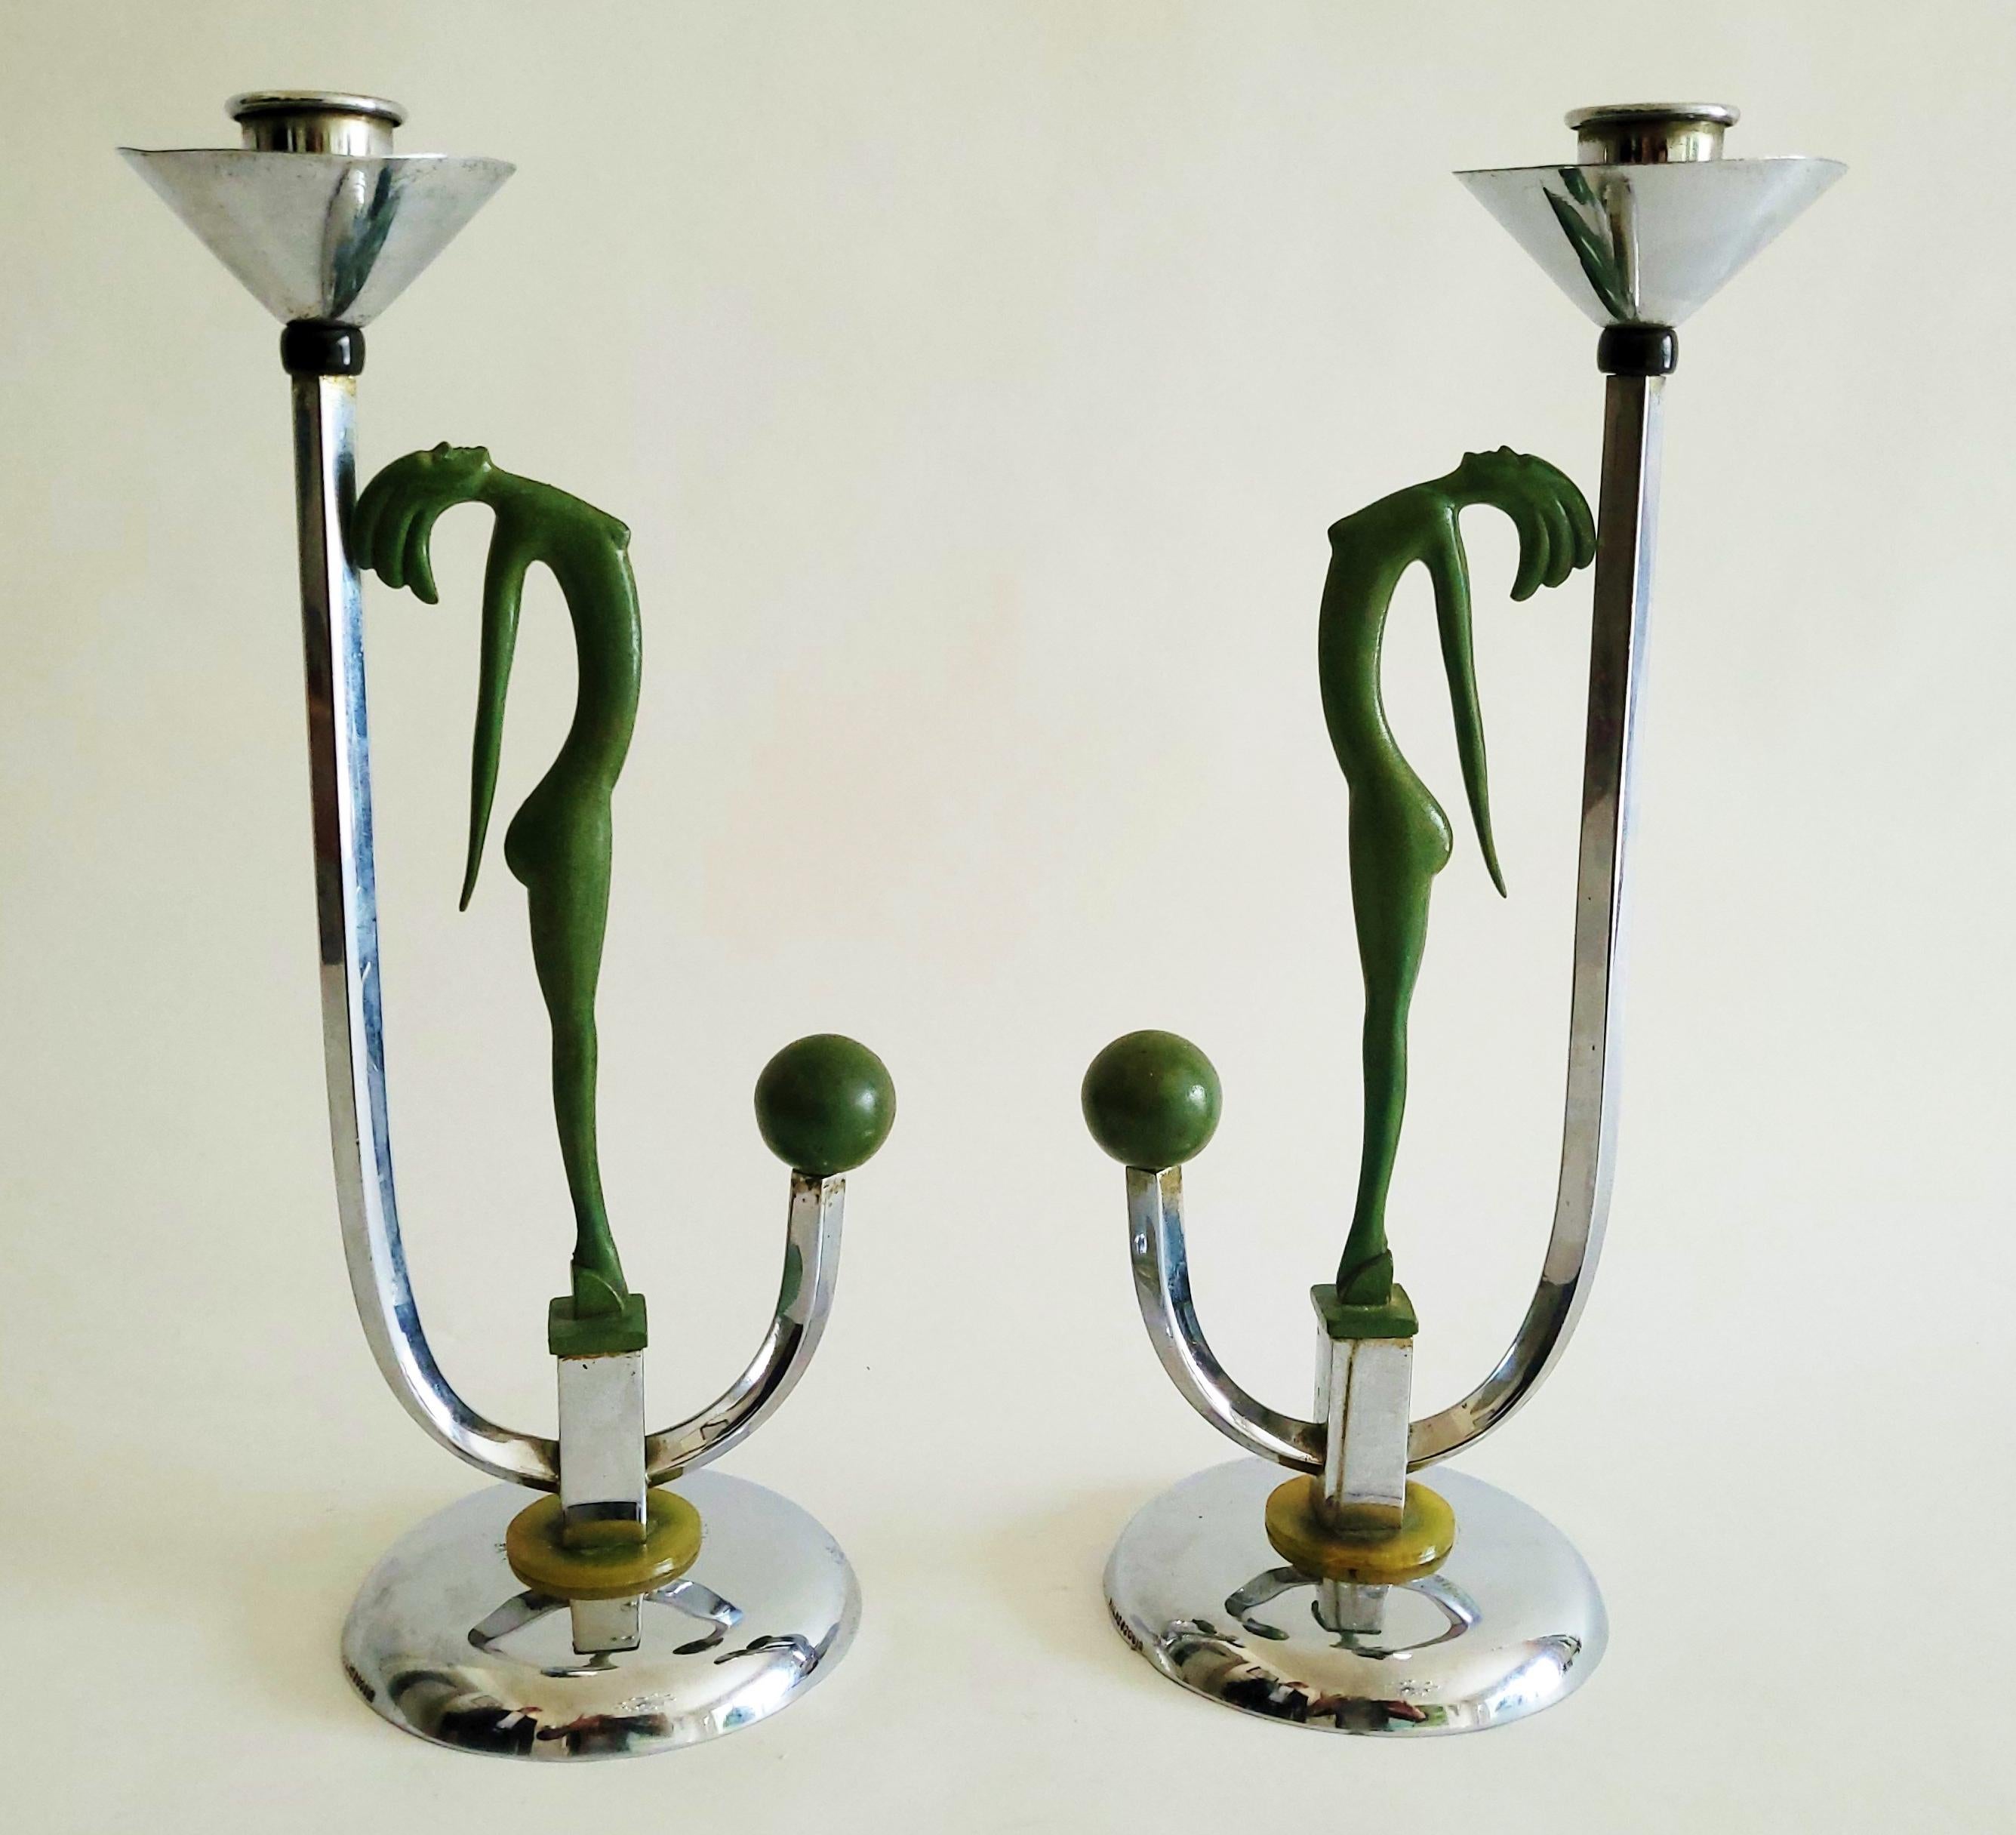 This magnificent pair of chrome and enameled English Art Deco candlesticks are part of a collection of designs for England's General Electric Company (GEC) each featuring a stylized nude created by the Austrian firm of Hagenauer. Ceiling lights wall